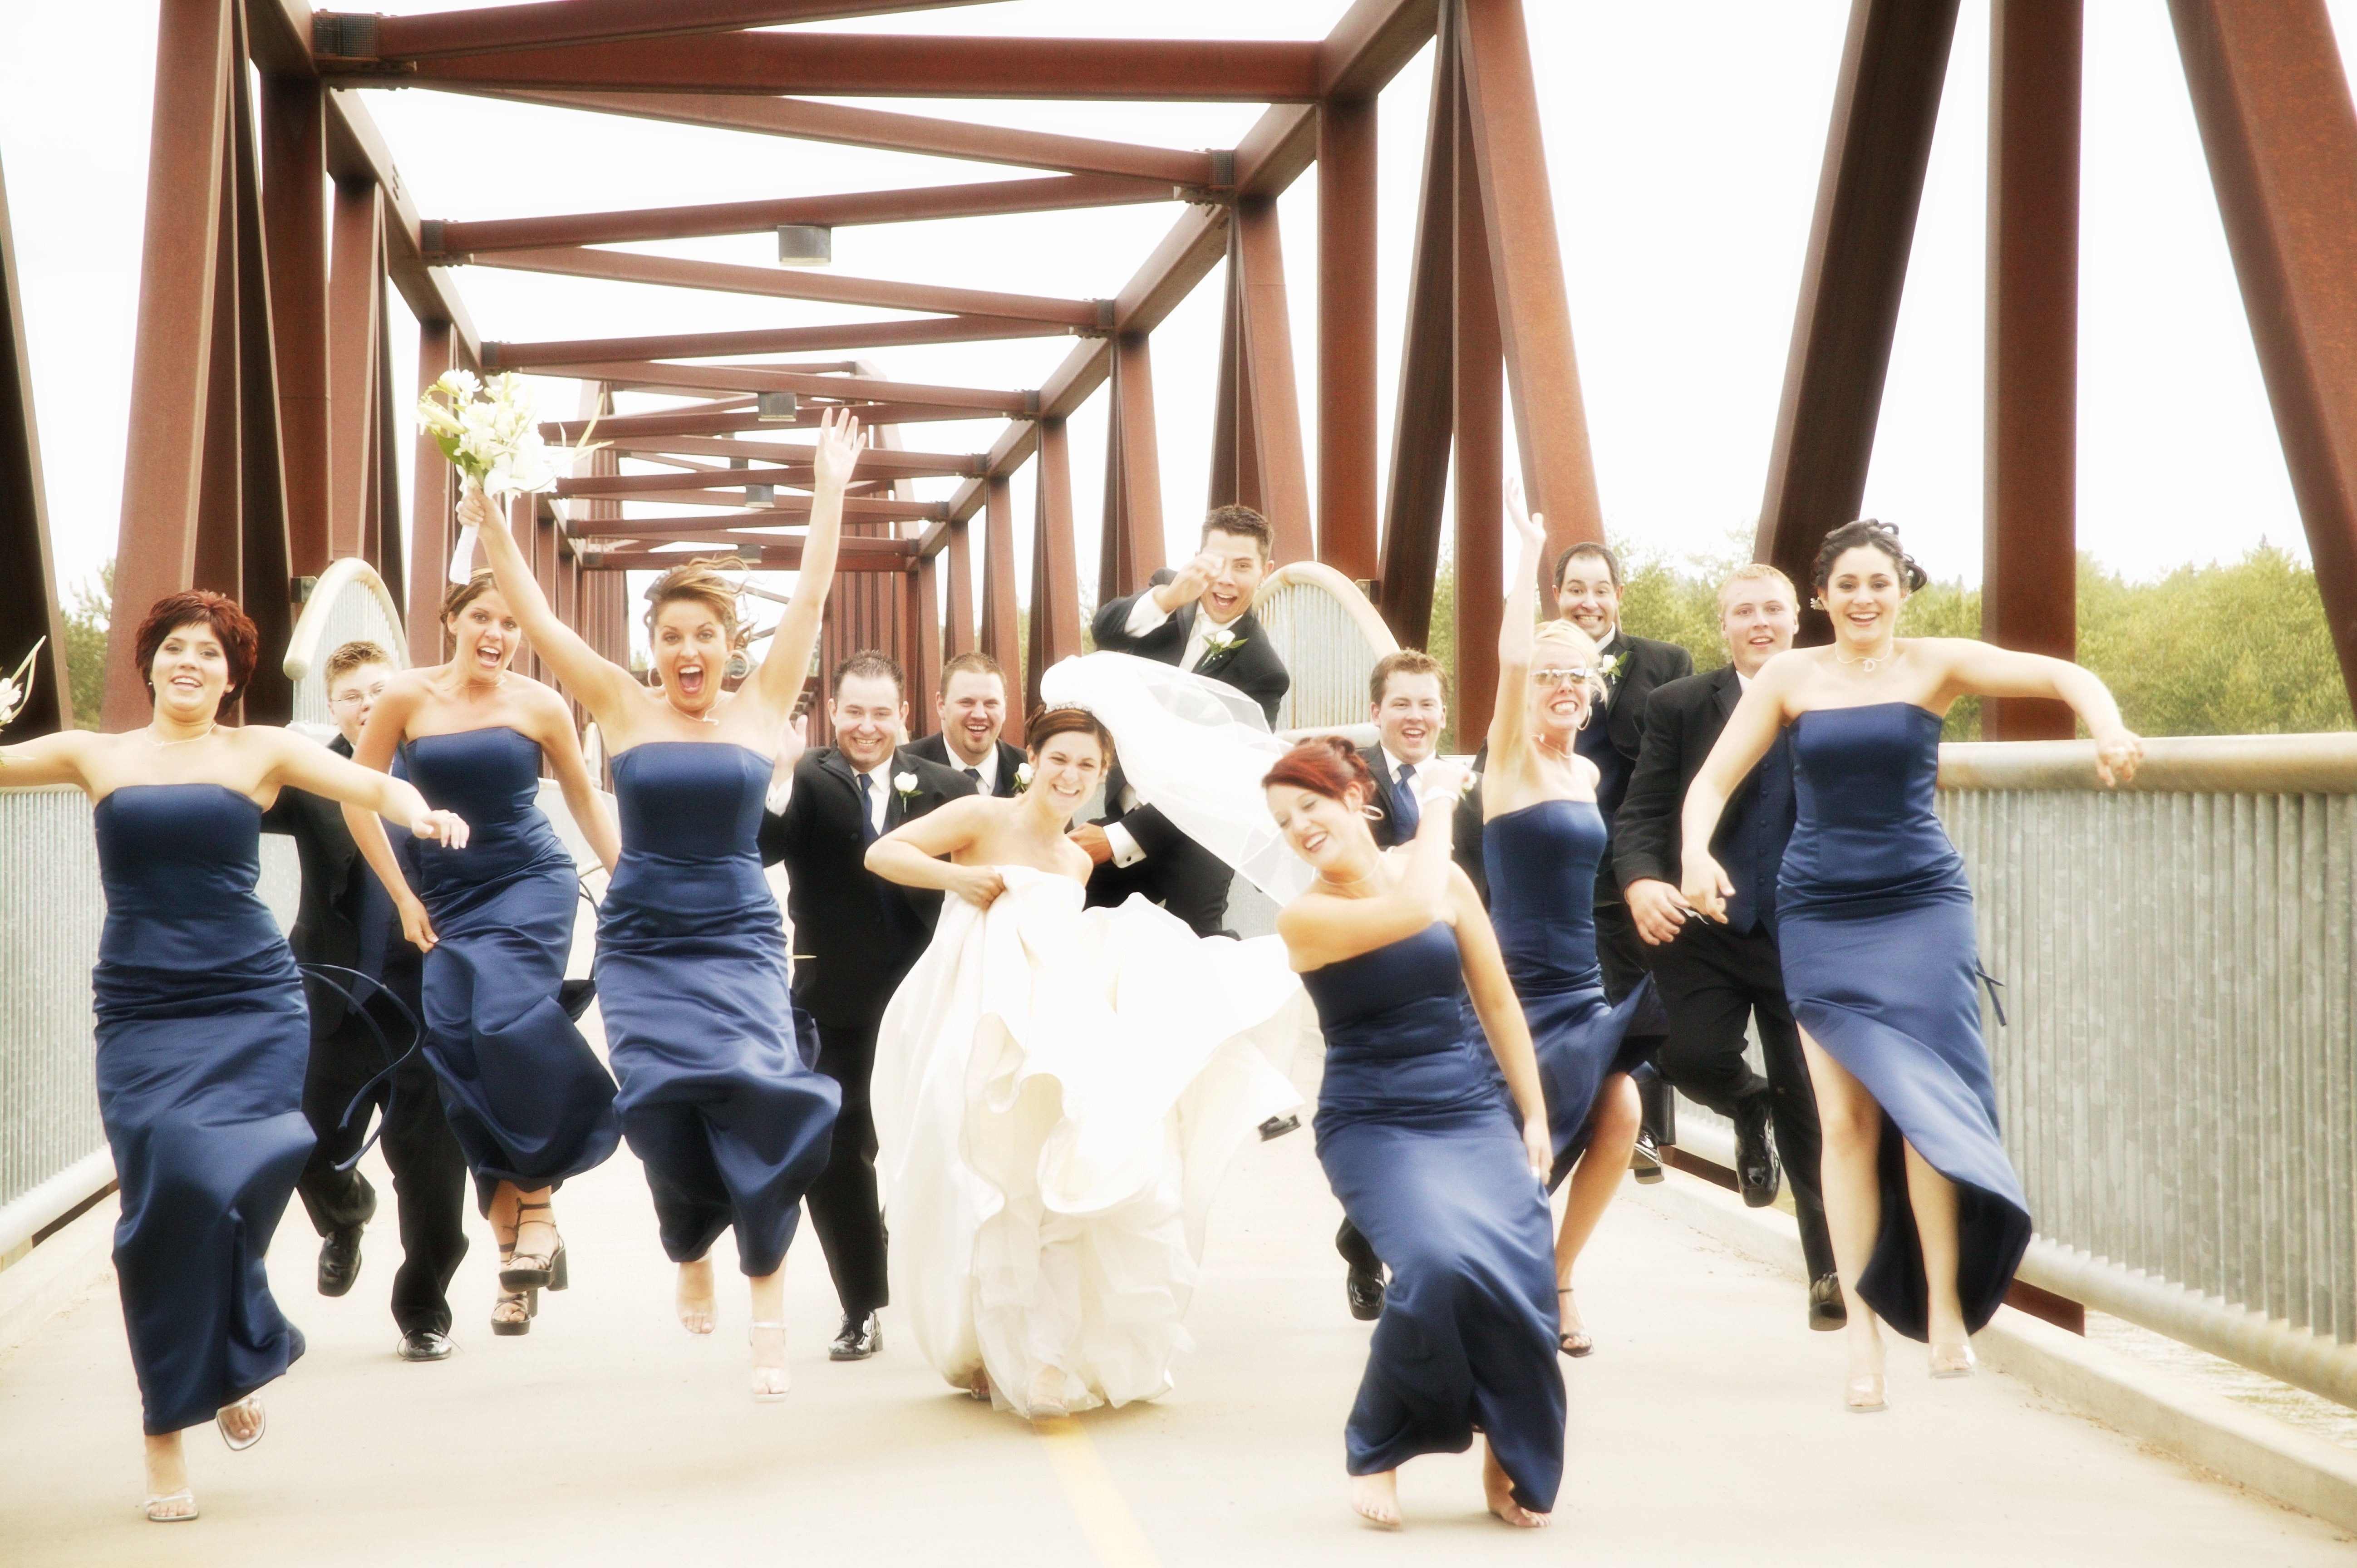 Photo of wedding party having fun and being silly